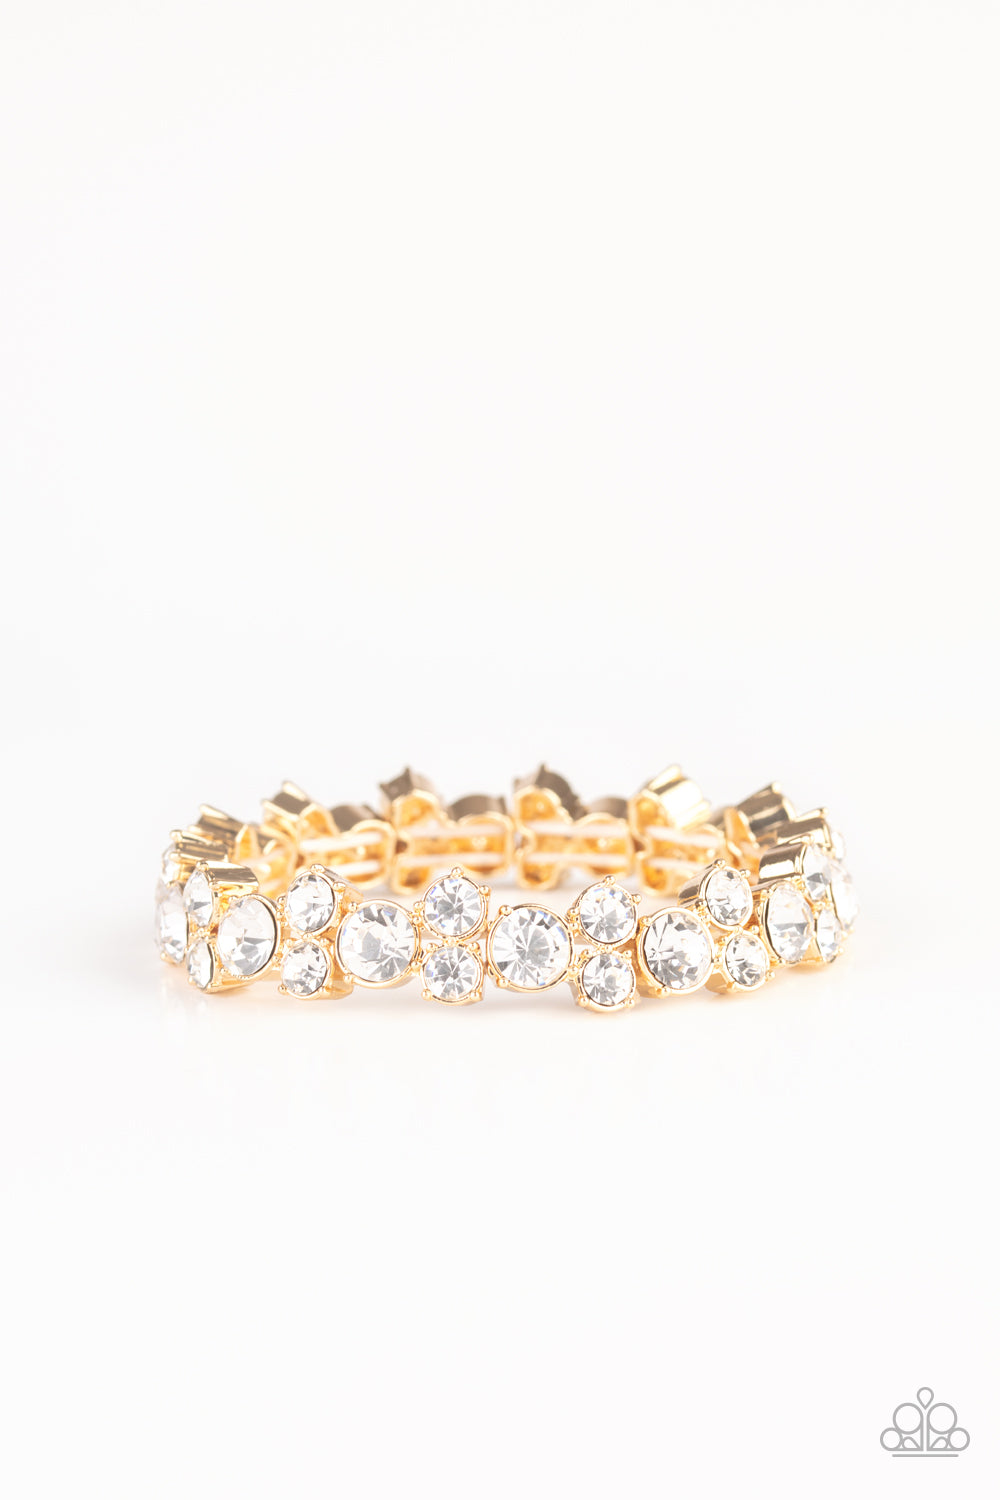 Paparazzi Accessories - Here Comes The BRIBE - Gold Bracelet